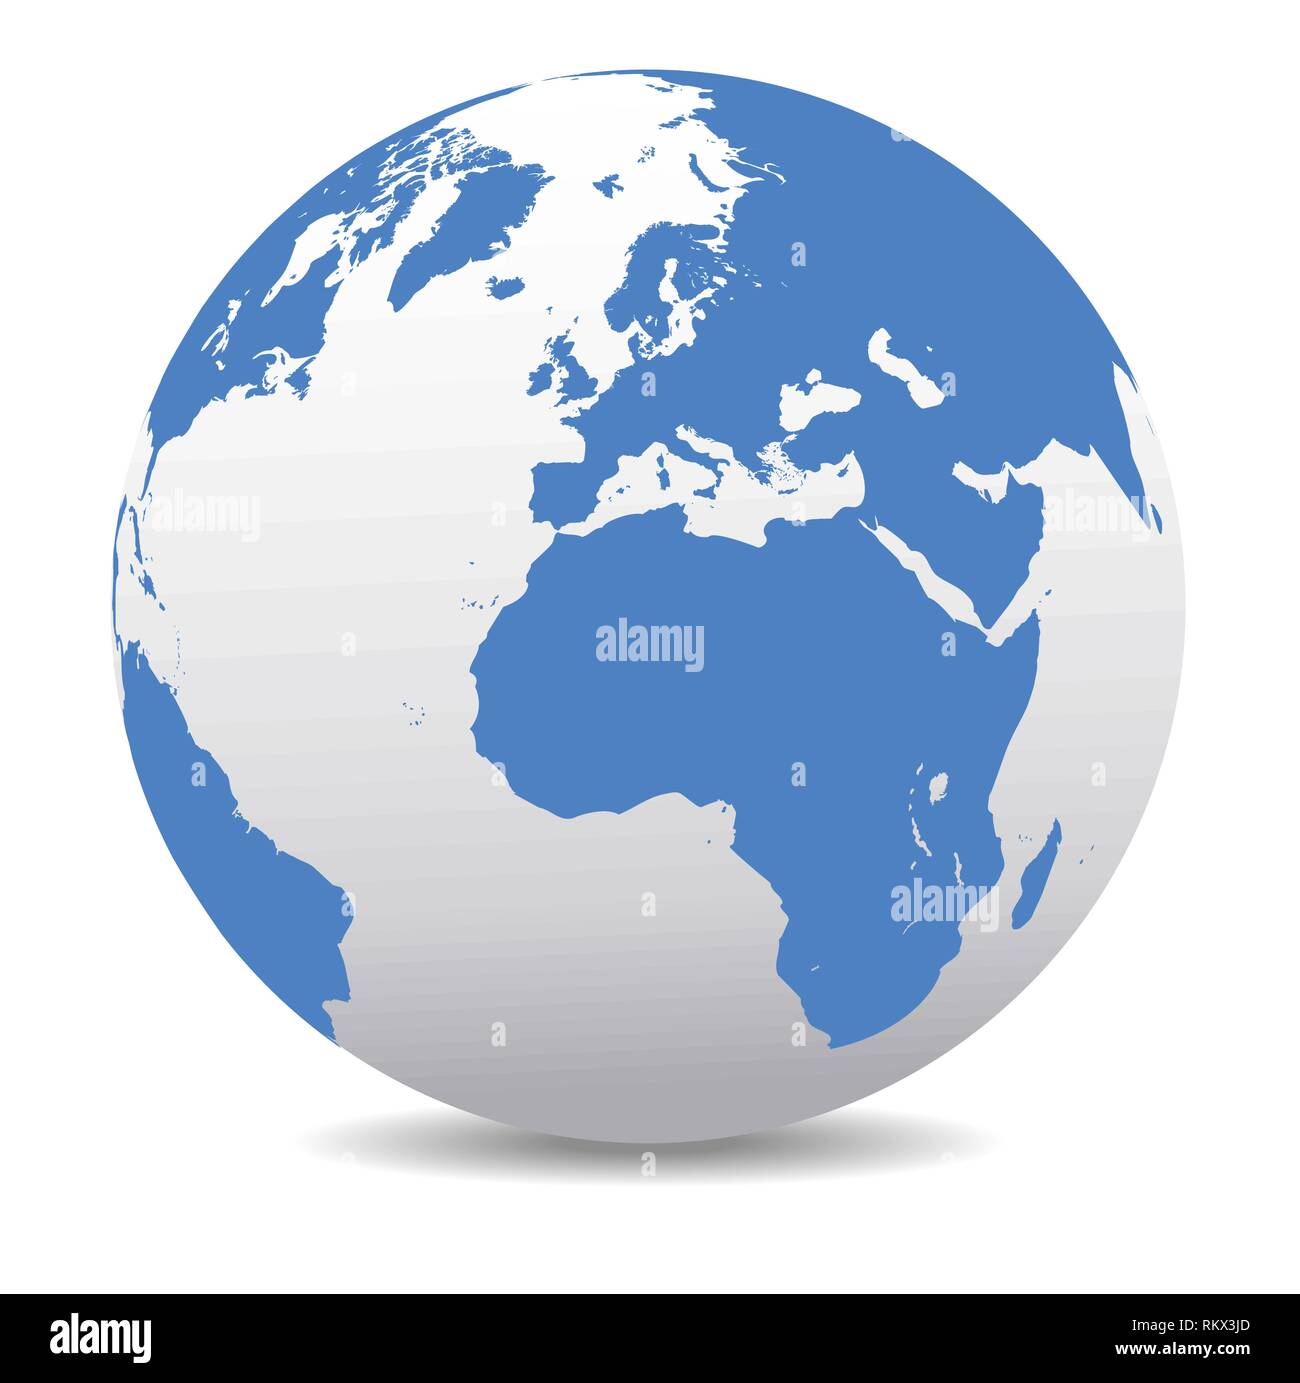 Europe and Africa, Global World, Vector Map Icon of the World Globe Stock Vector